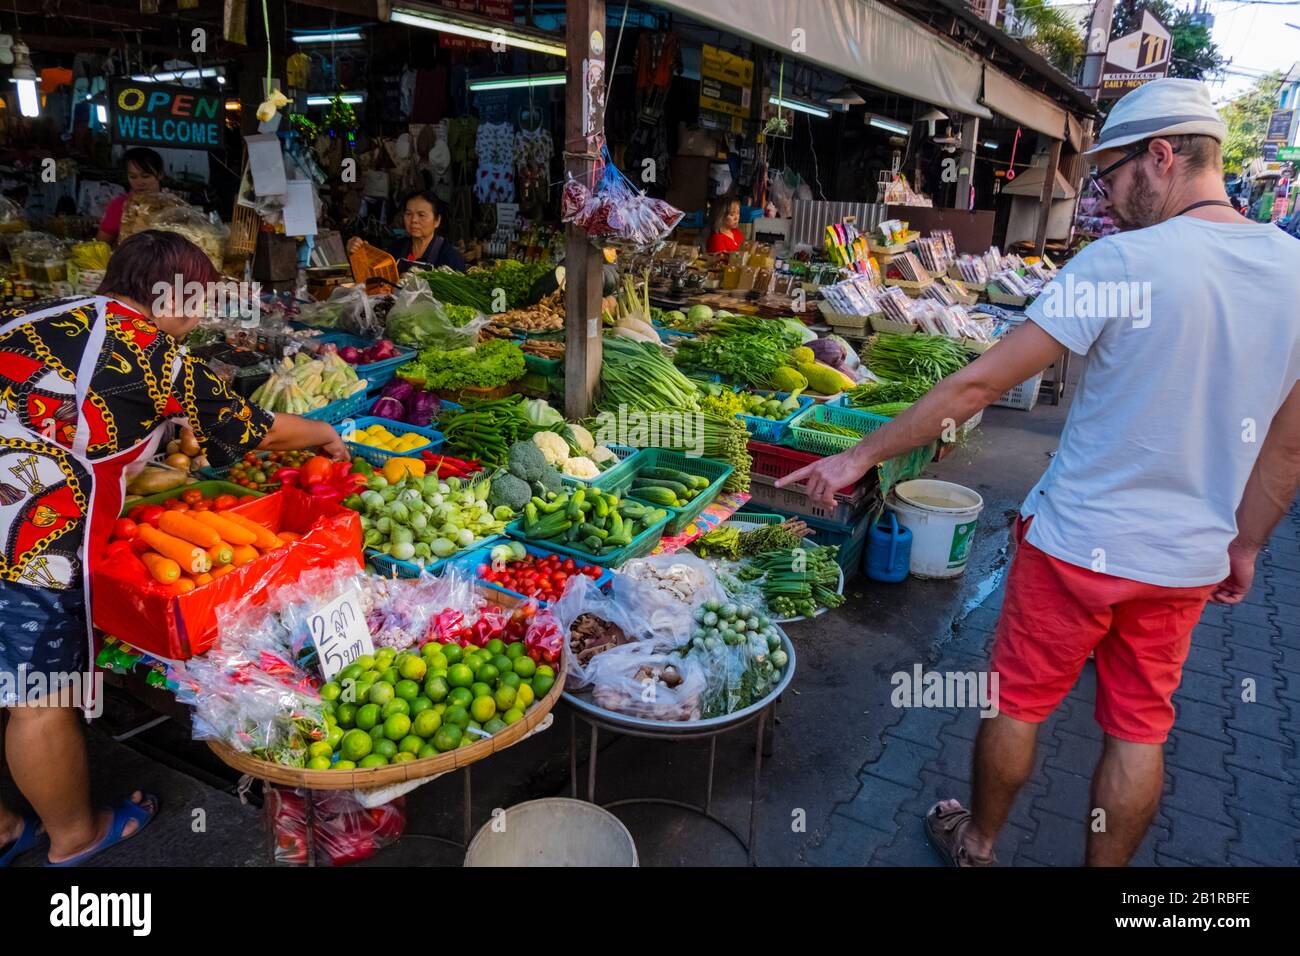 Fruit and vegetable stalls, Somphet Market, old town, Chiang Mai, Thailand Stock Photo